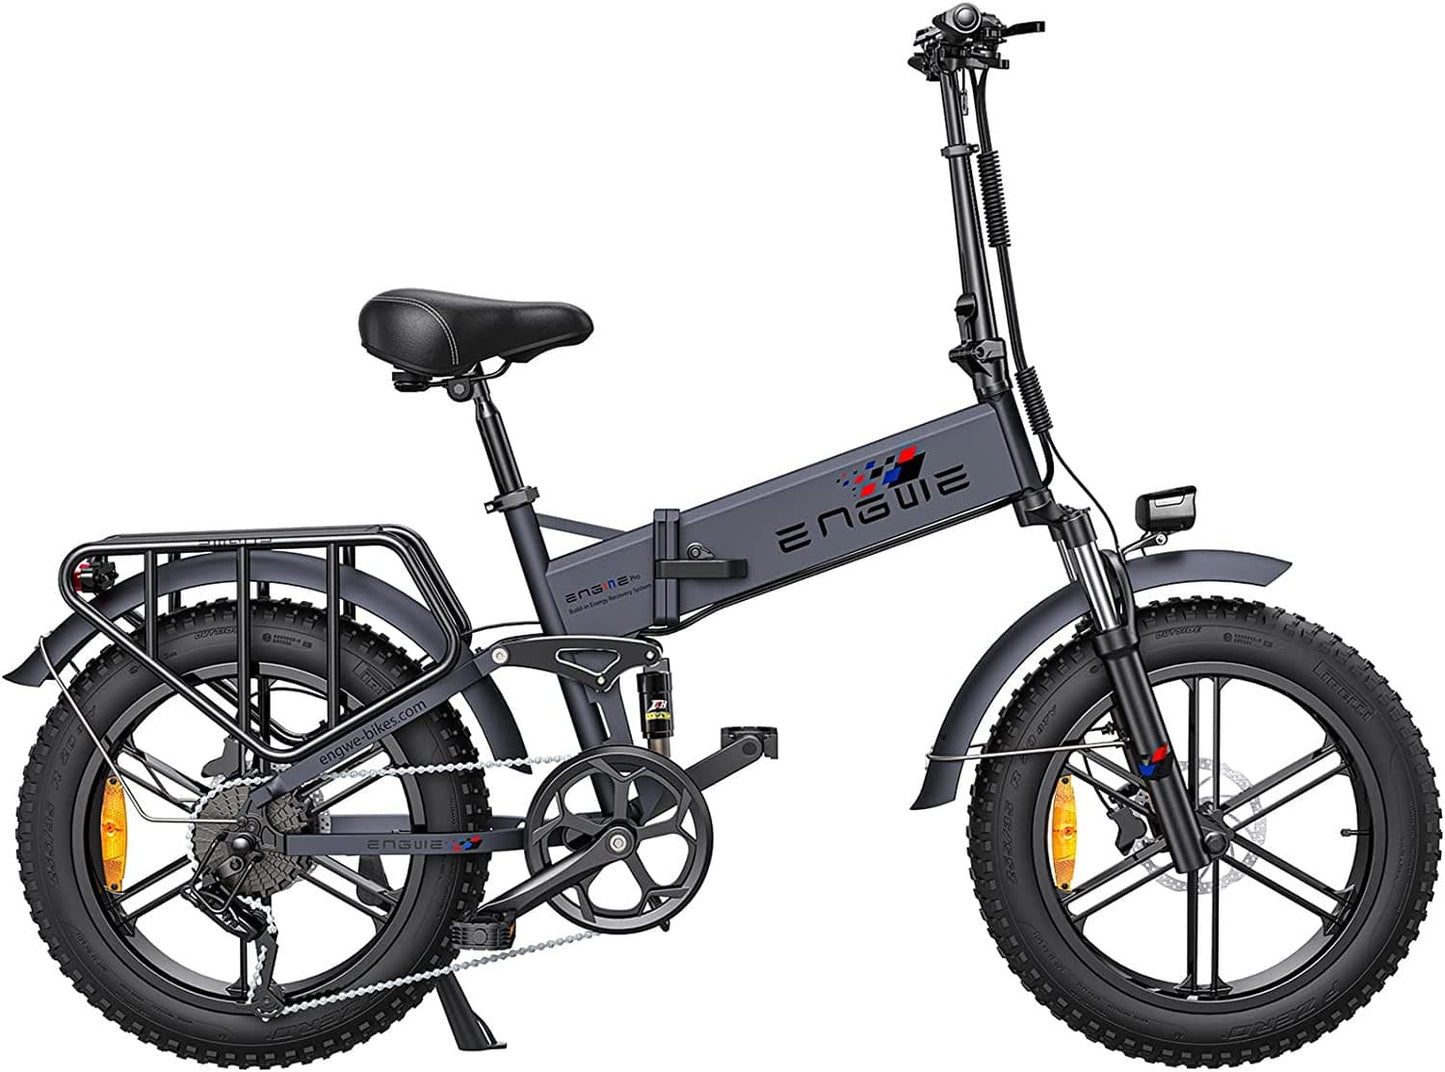 ENGWE Upgrade Folding Electric Bicycle for Adults 750W 48V16Ah Build-in Lithium Large Battey Long Range 20 * 4.0" Fat Tire E-Bike All Terrien Mountain Snow Beach City Cruiser Electric Bike Engine Pro.